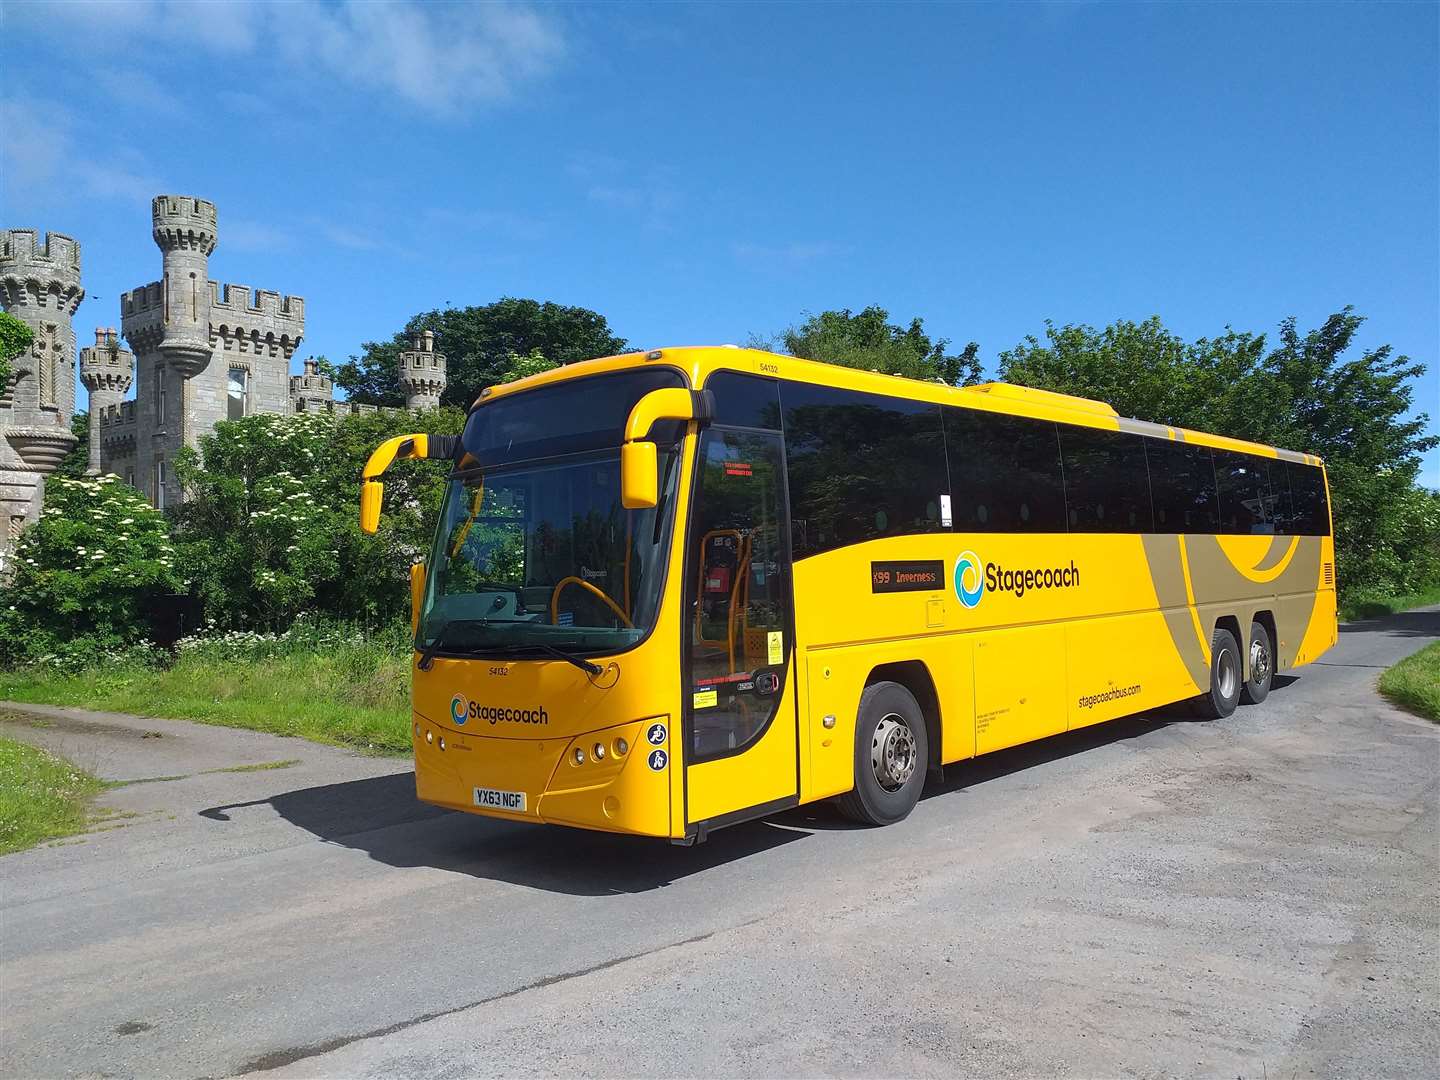 The new type of coach now running on Stagecoach's service between Caithness and the Highland capital.